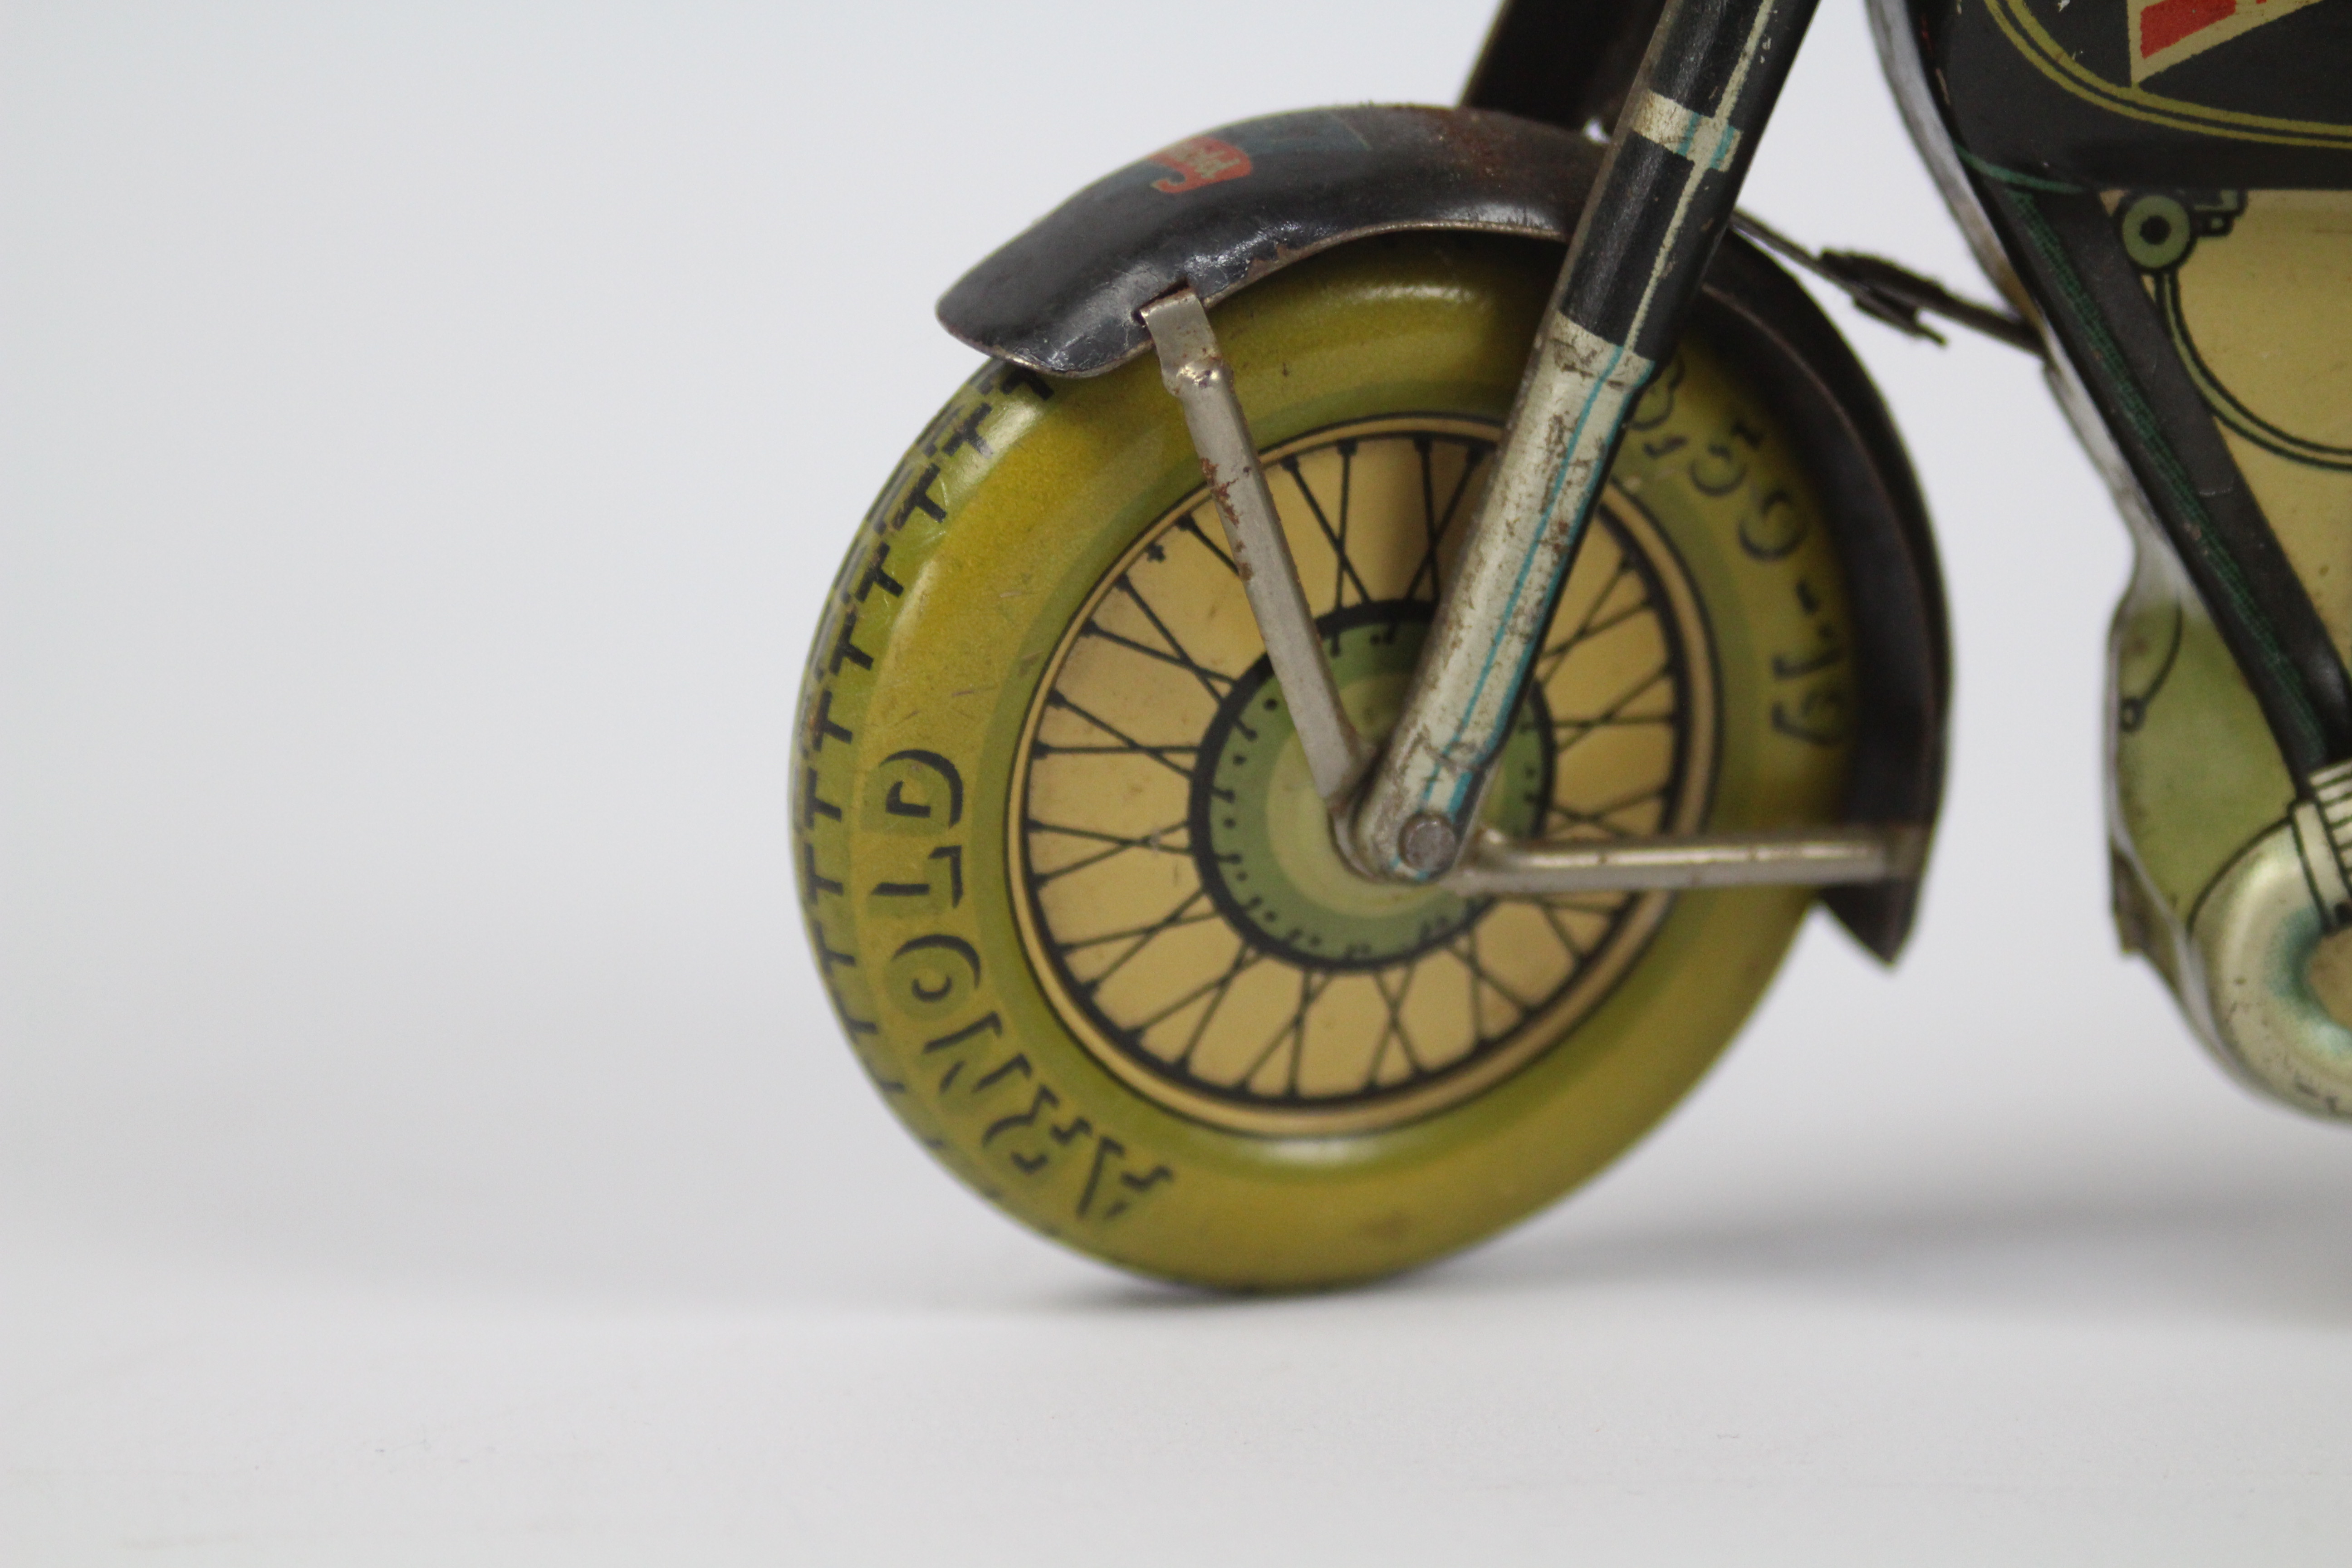 Arnold - A rare Arnold Mac 700 clockwork tinplate Motorcycle made in the US Zone Germany measuring - Image 5 of 8